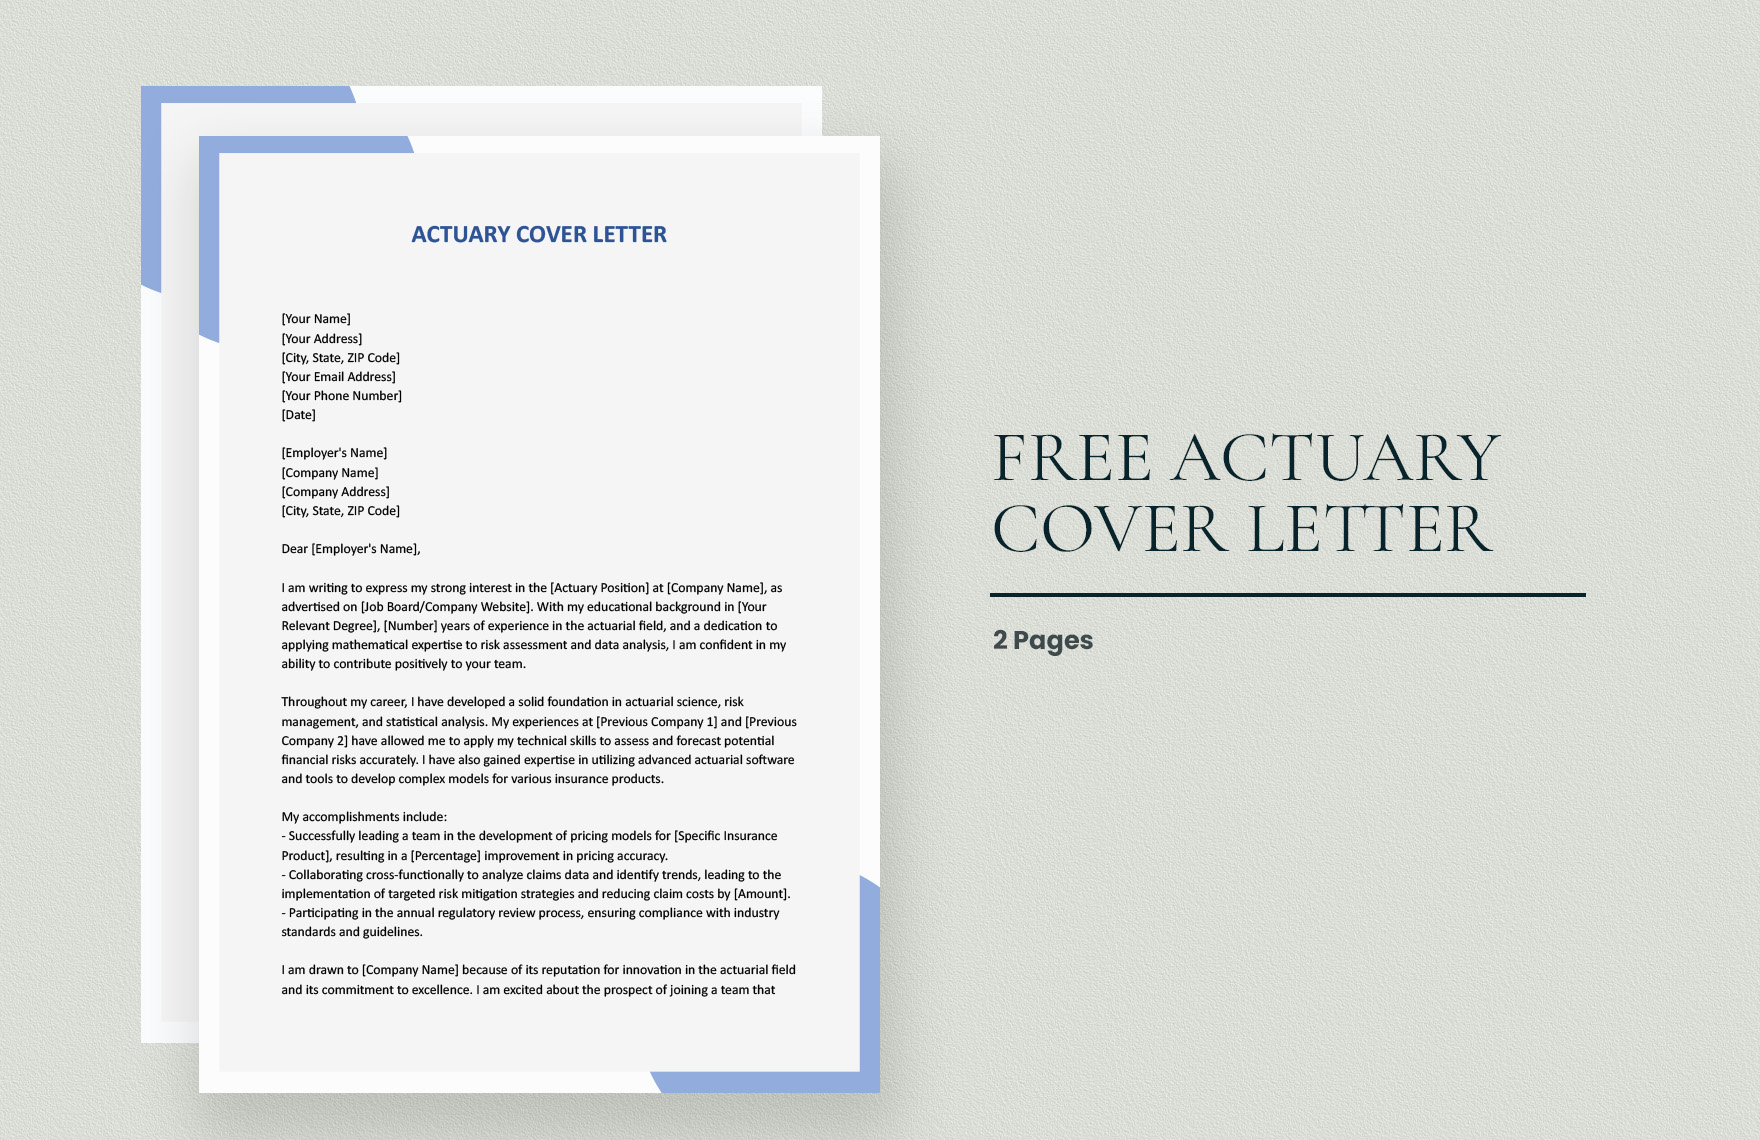 Actuary Cover Letter in Word, Google Docs